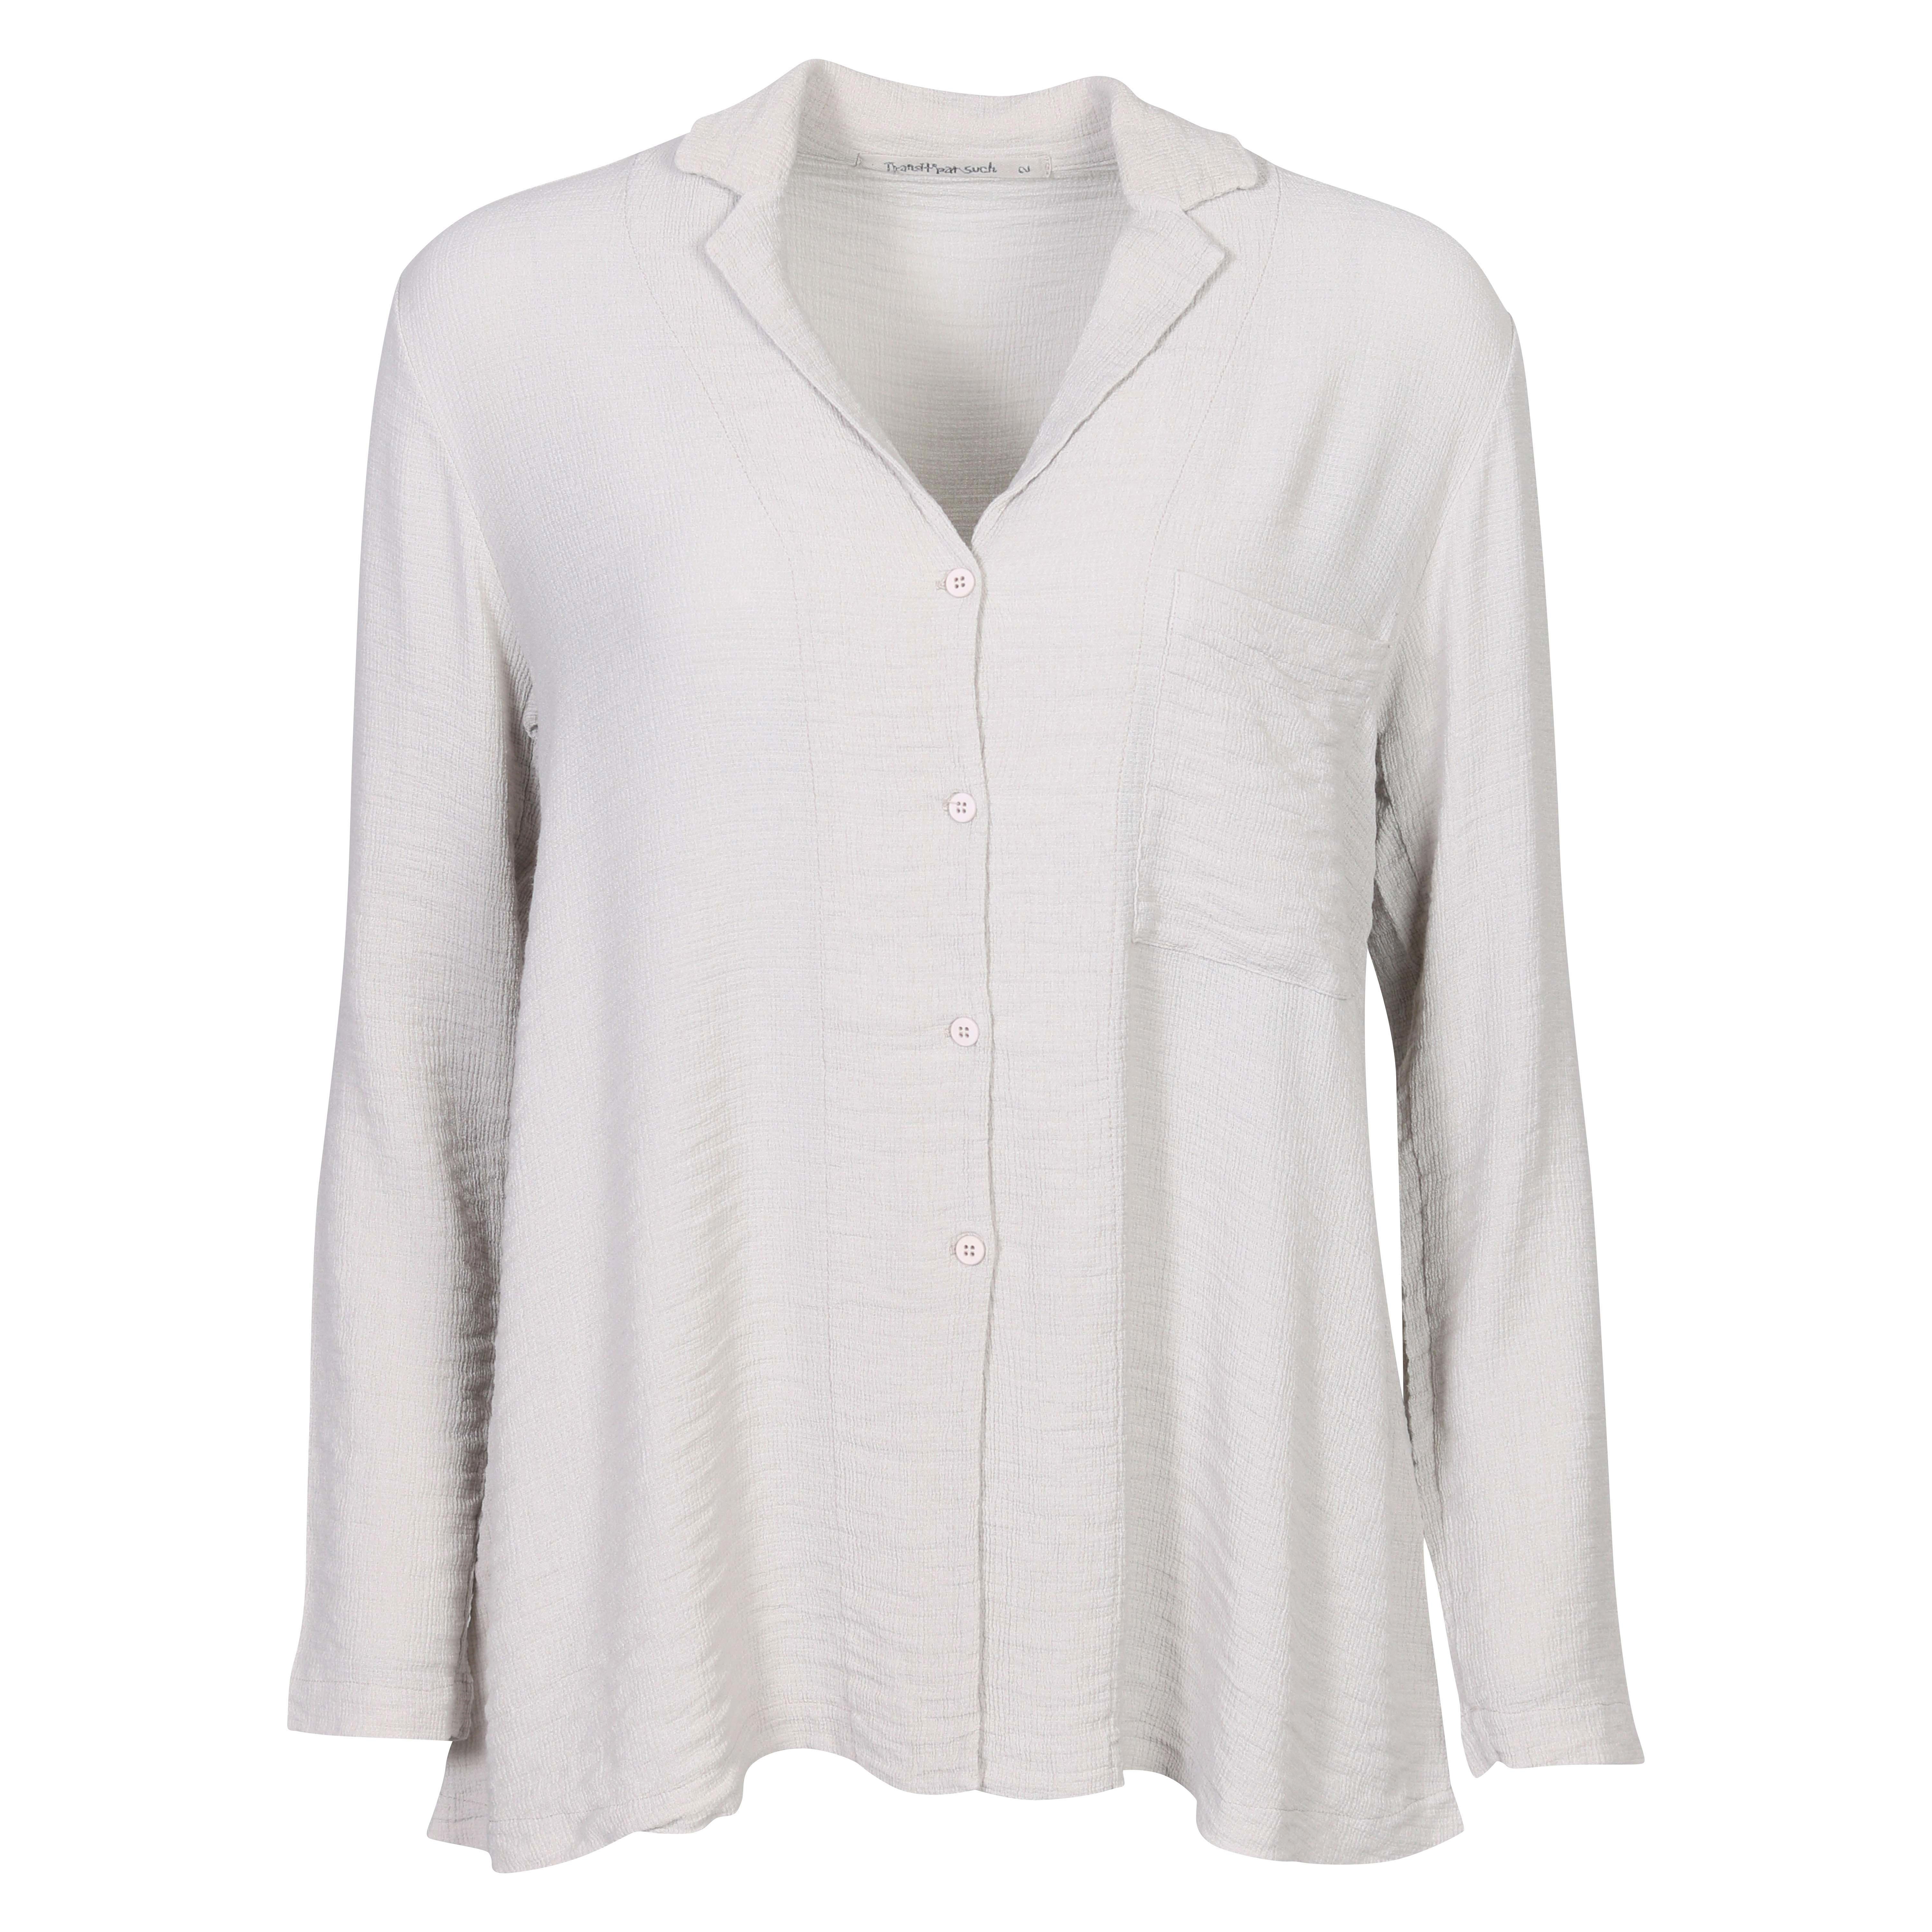 Transit Par Such Camicia Blouse in Light Grey